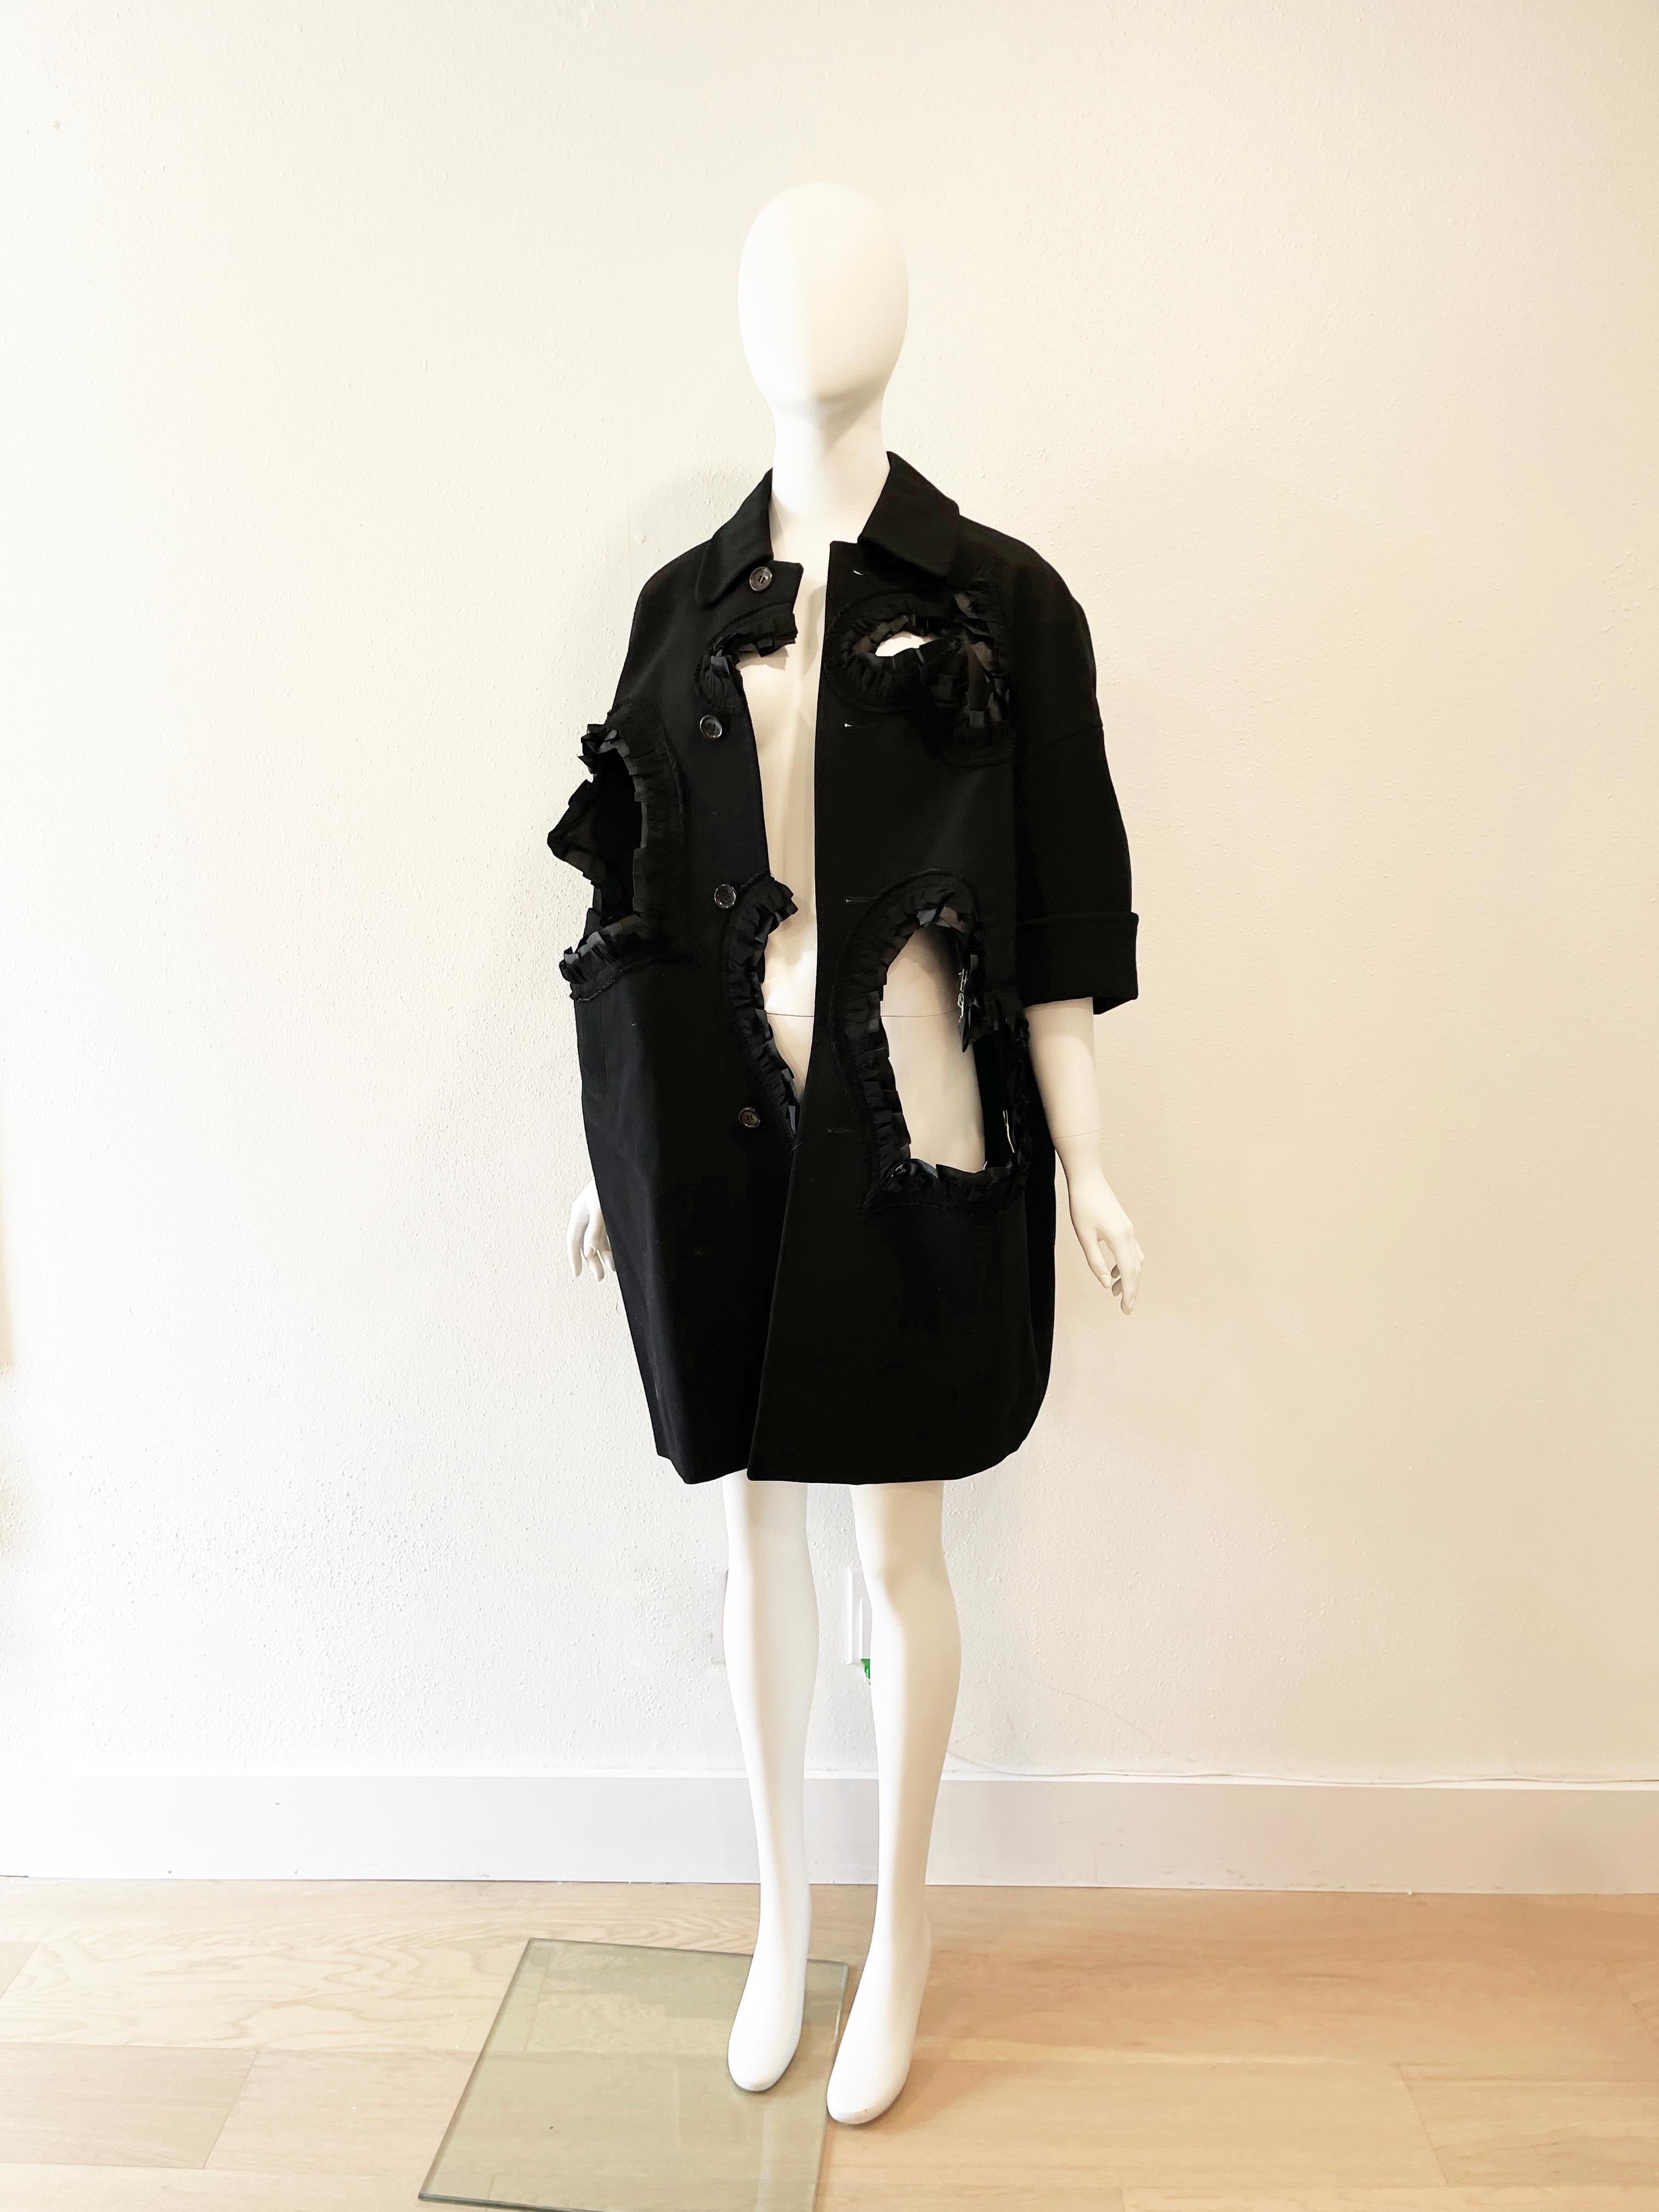 2008 Comme des Garcons Black Heart Cut Out Ruffle coat. 
#4 from Fall 2008 Collection. 66